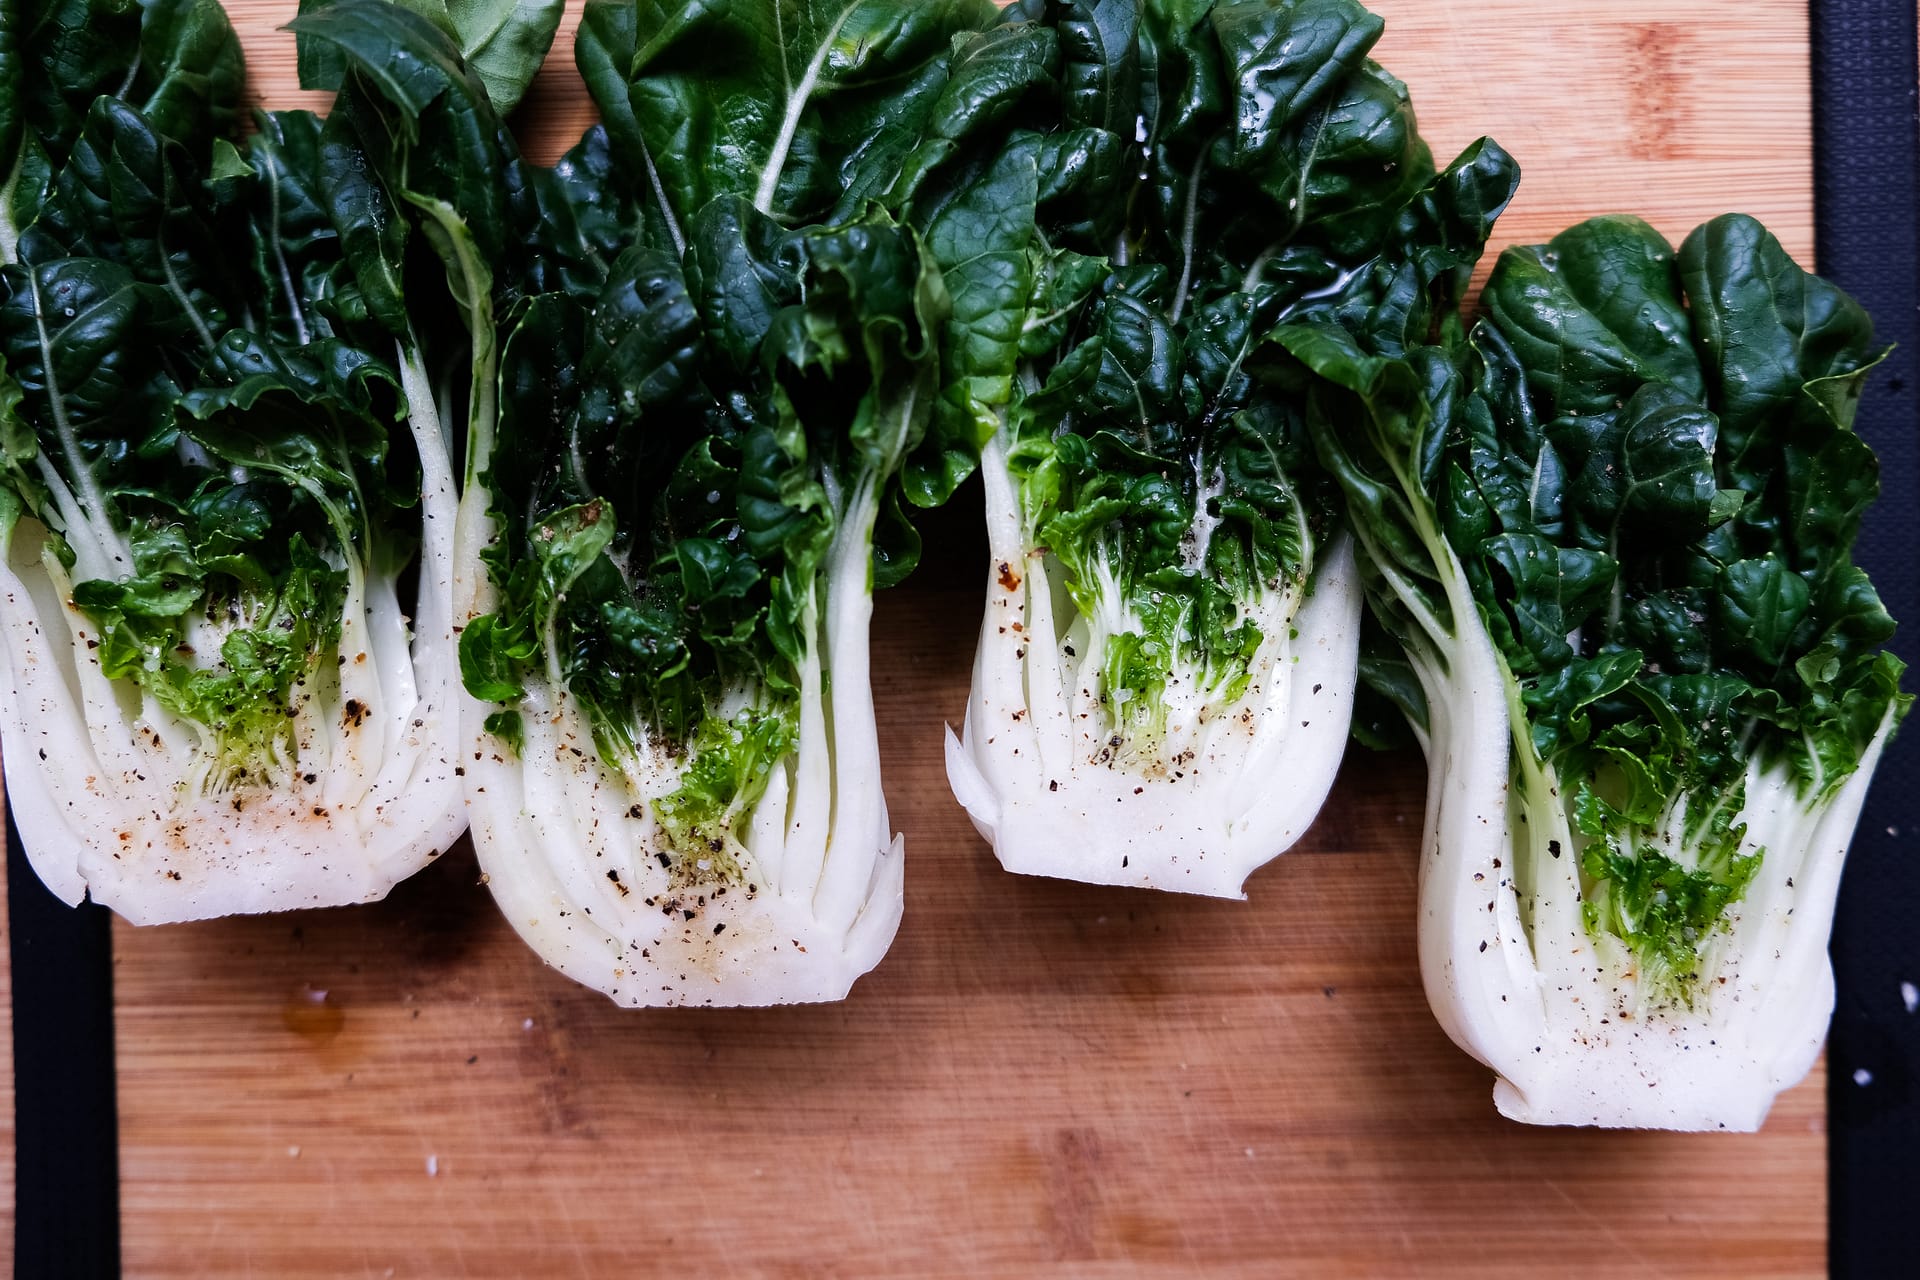 Four pieces of Bok Choy on a wooden cutting board